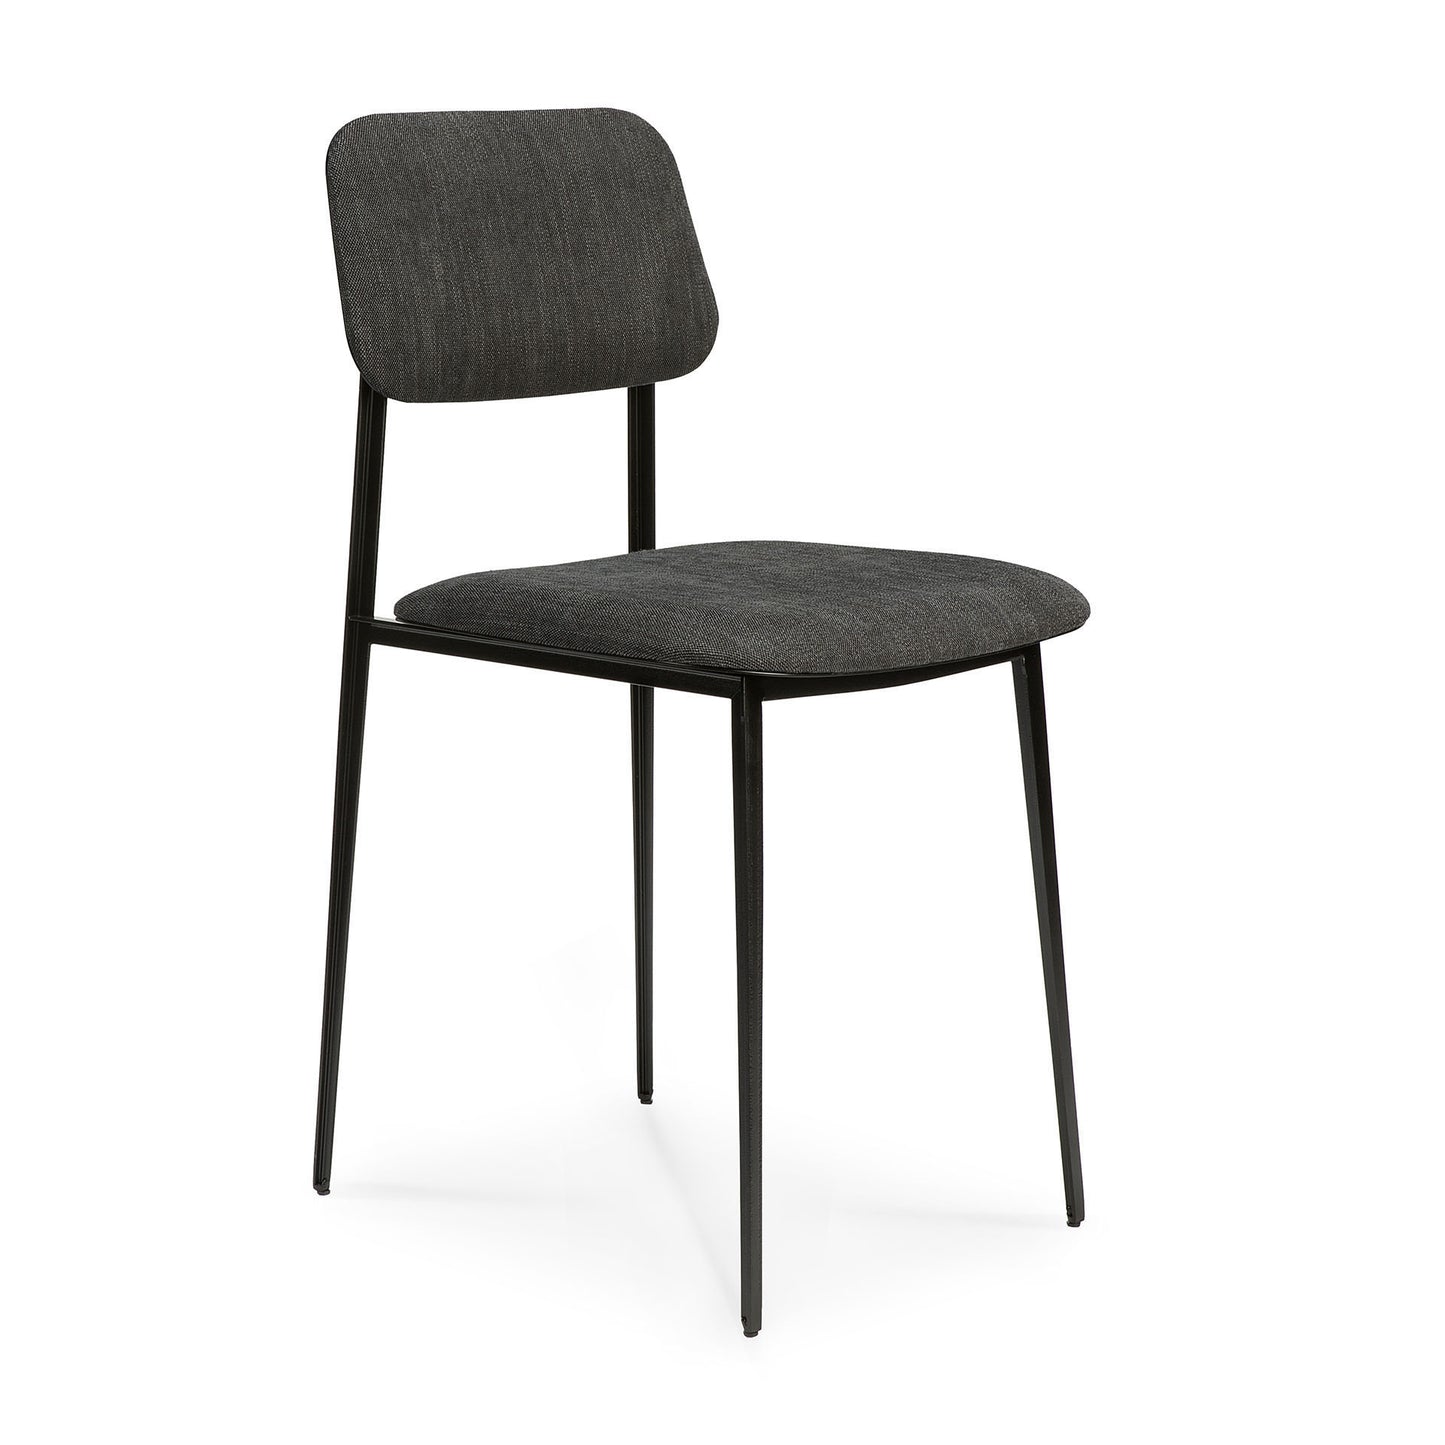 Load image into Gallery viewer, DC Dining Chair By Djordje Cukanovic | Dark Grey
